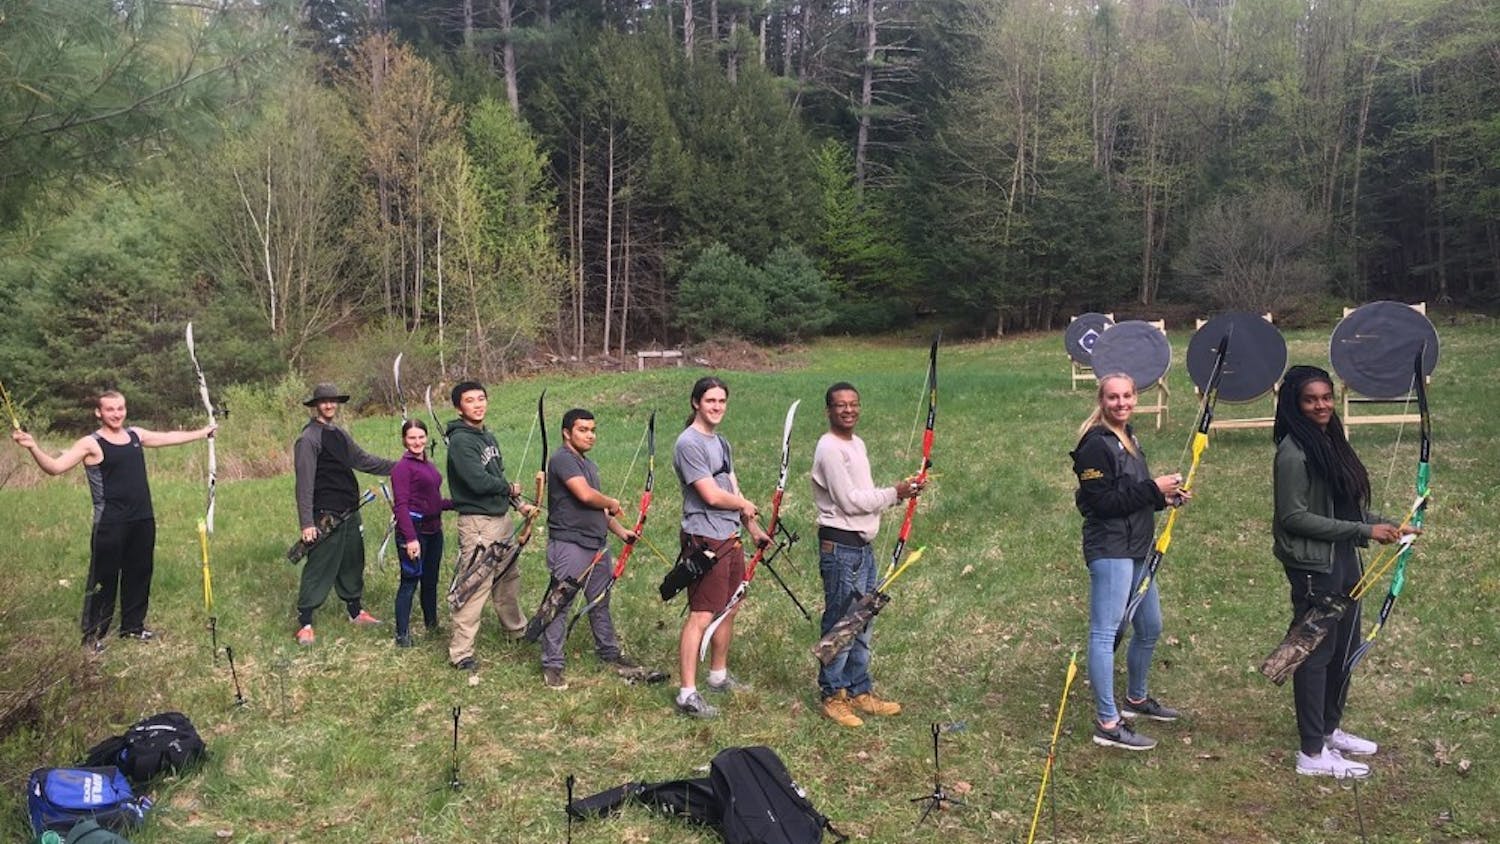 Dartmouth archery, founded by Mikey Steel ’21 last winter, is one of the youngest clubs on campus.